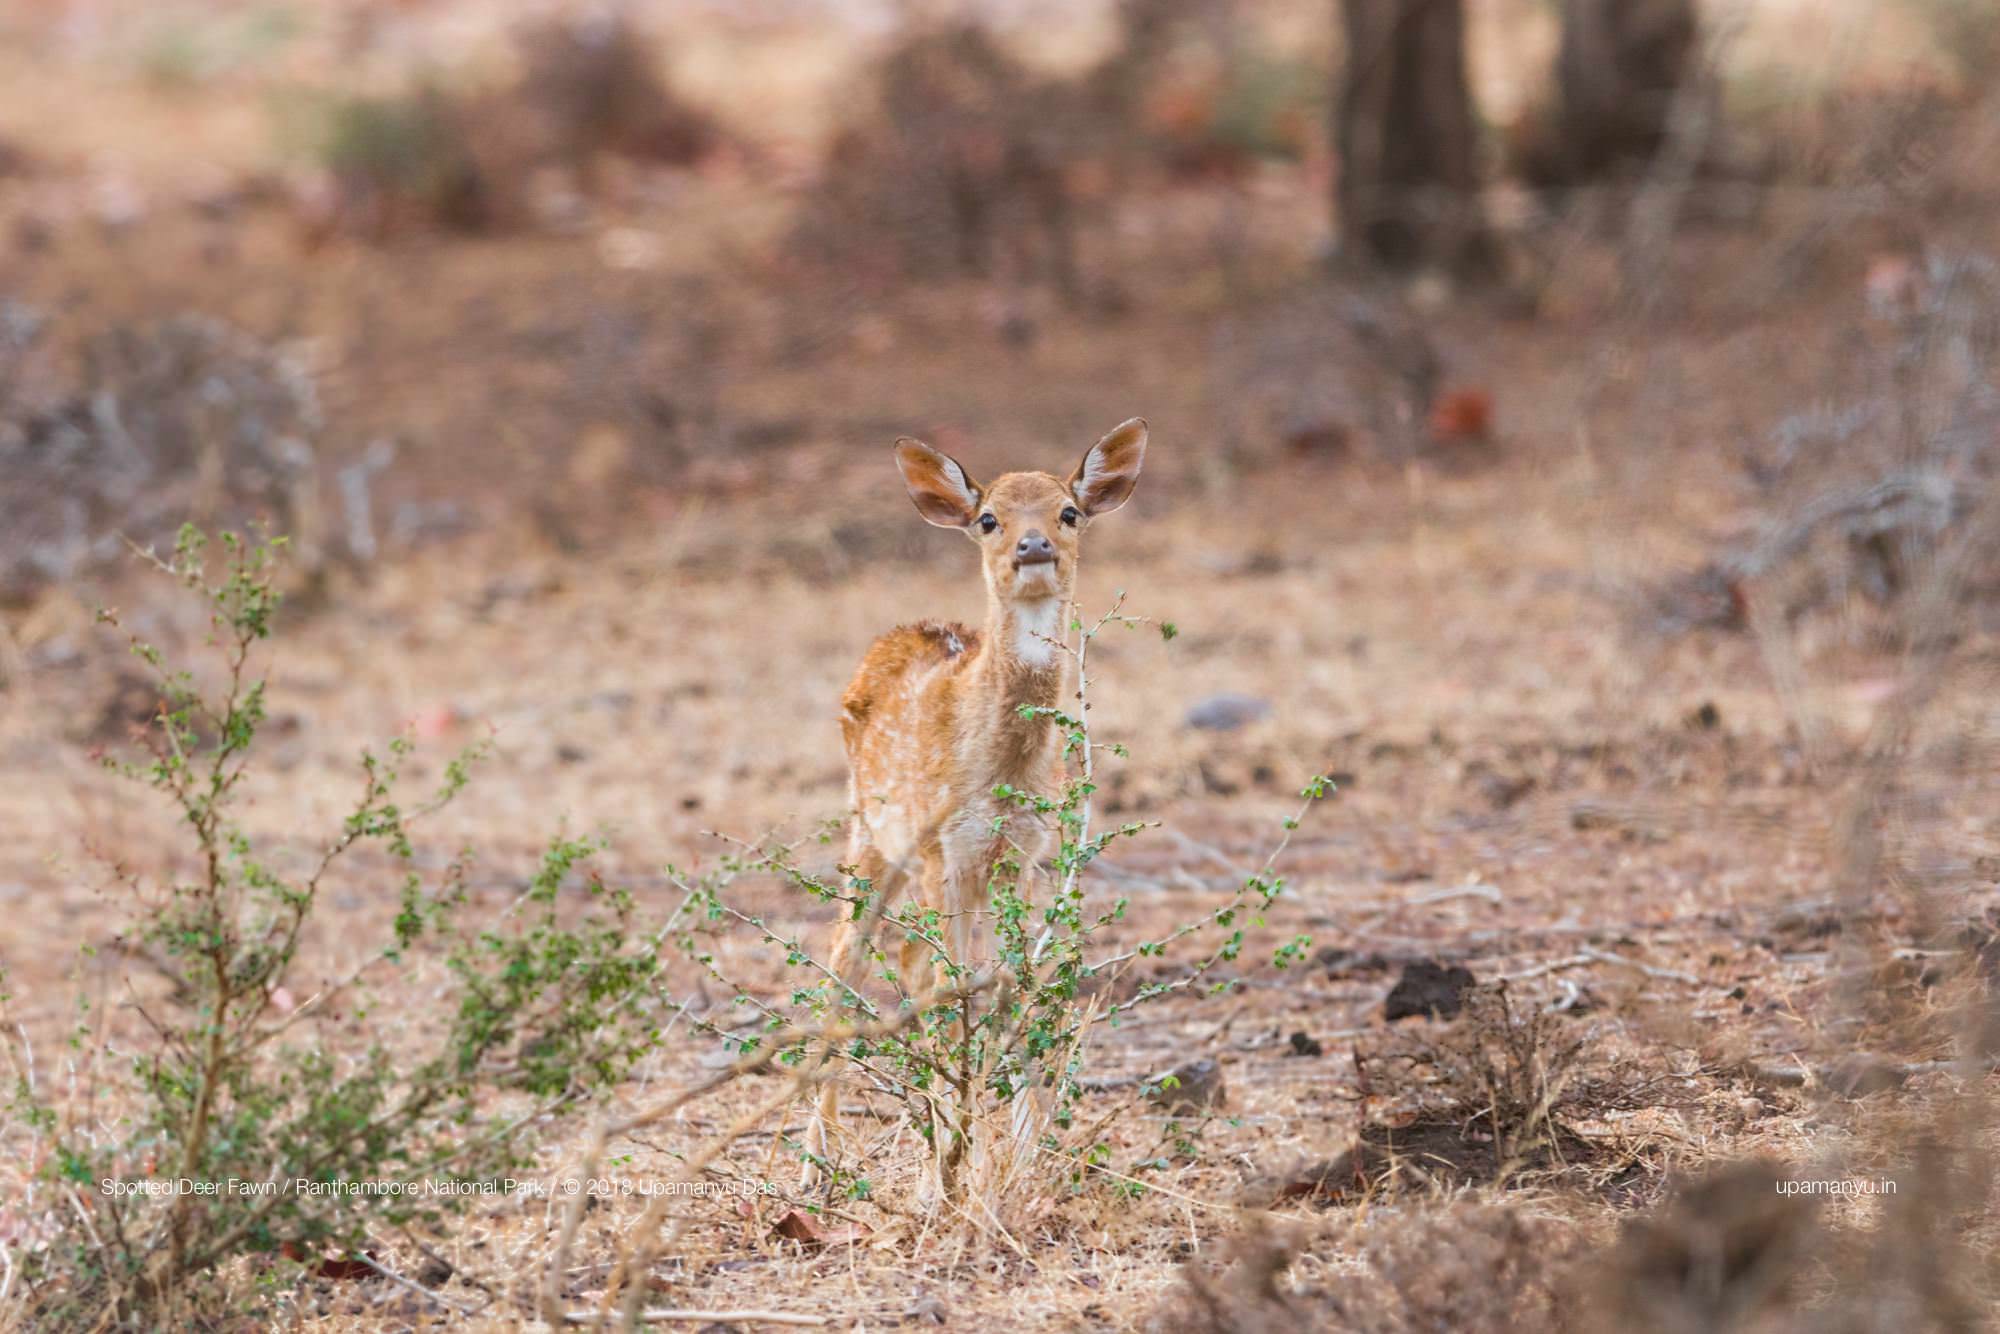 Spotted Dear Fawn (Ranthambore)